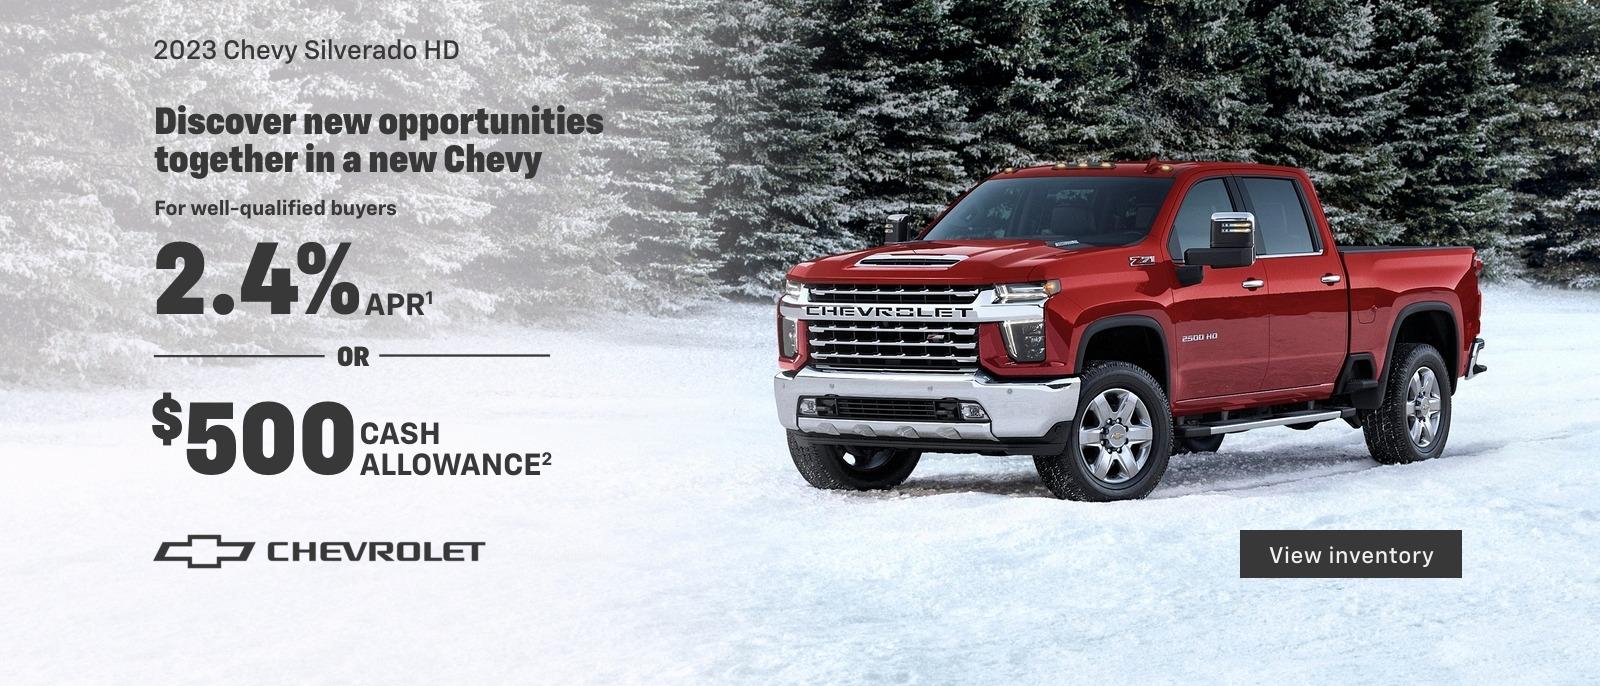 2023 Chevy Silverado HD. Discover new opportunities together in a new Chevy. For well-qualified buyers 2.4% APR. Or, $500 cash allowance.